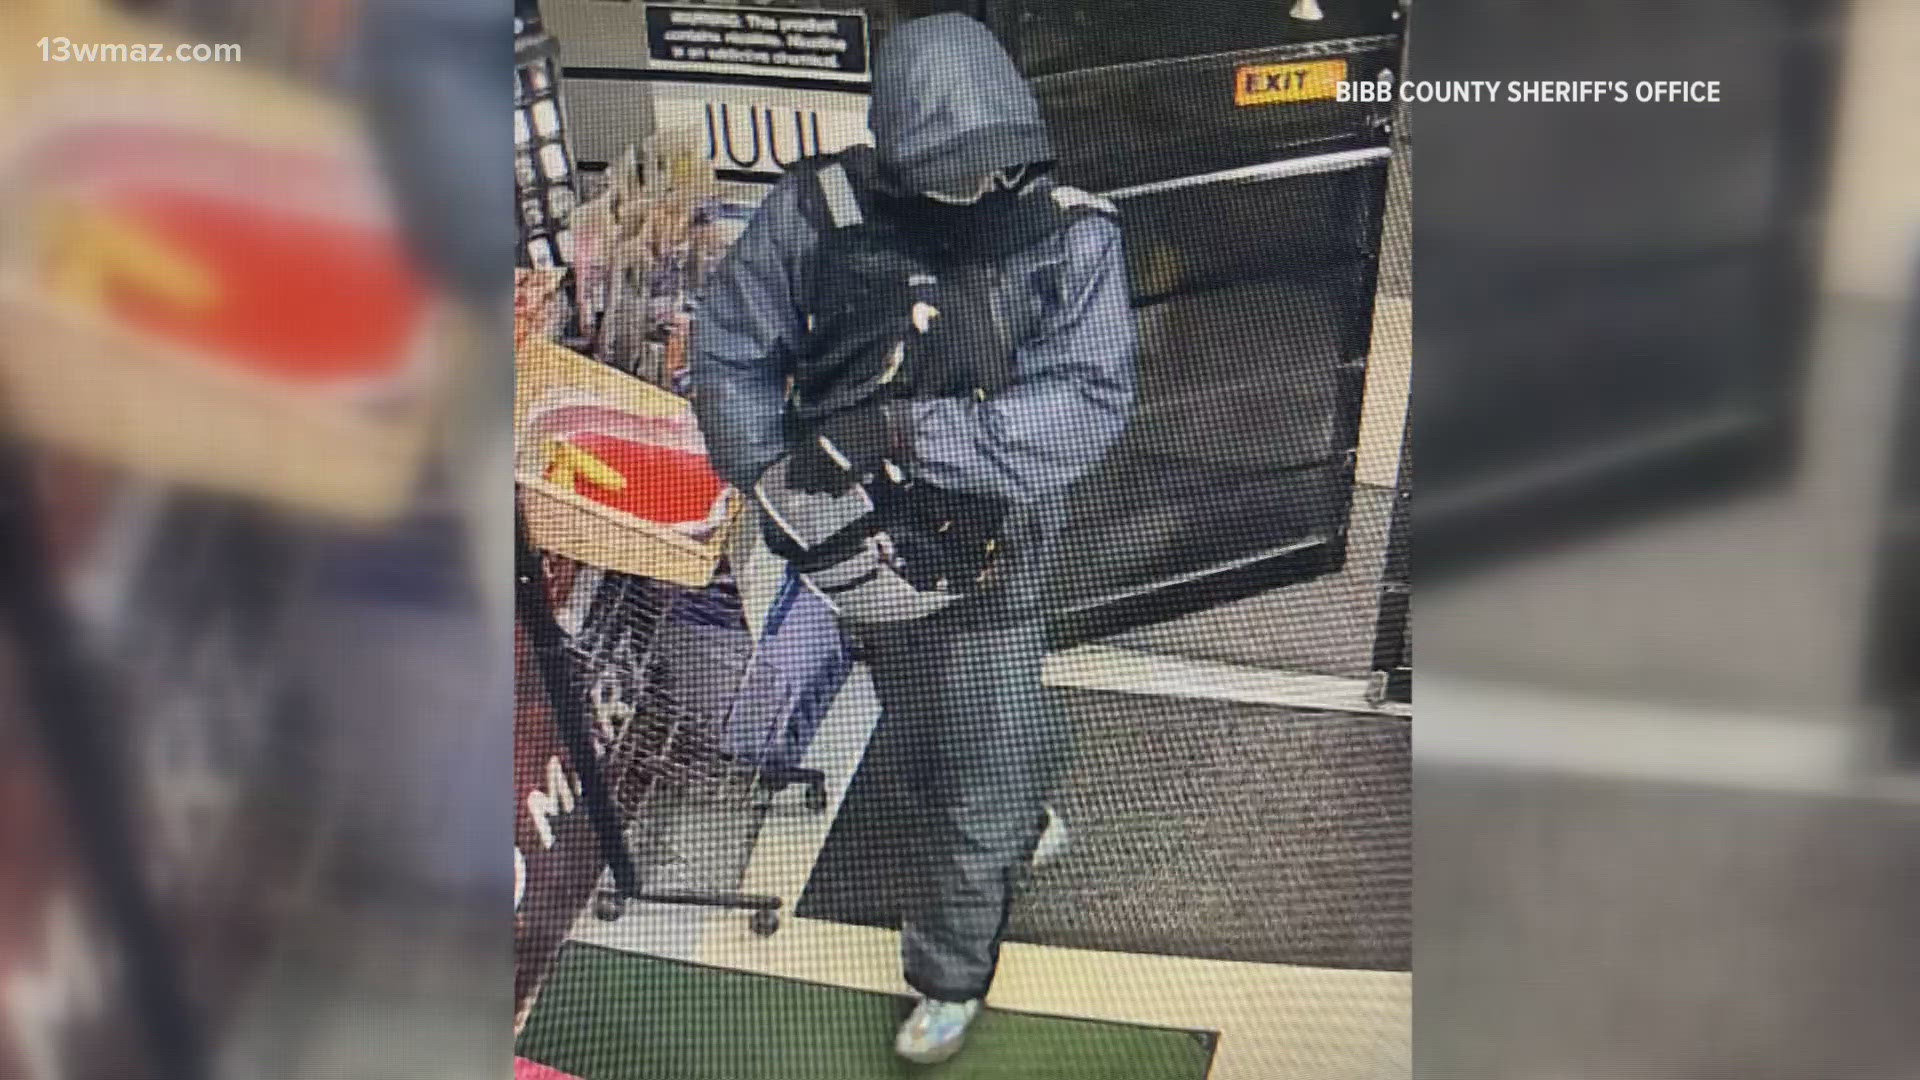 They say it happened at around 4:15 a.m. at the Citgo on Houston Road. Now, they're asking for your help finding the suspect.